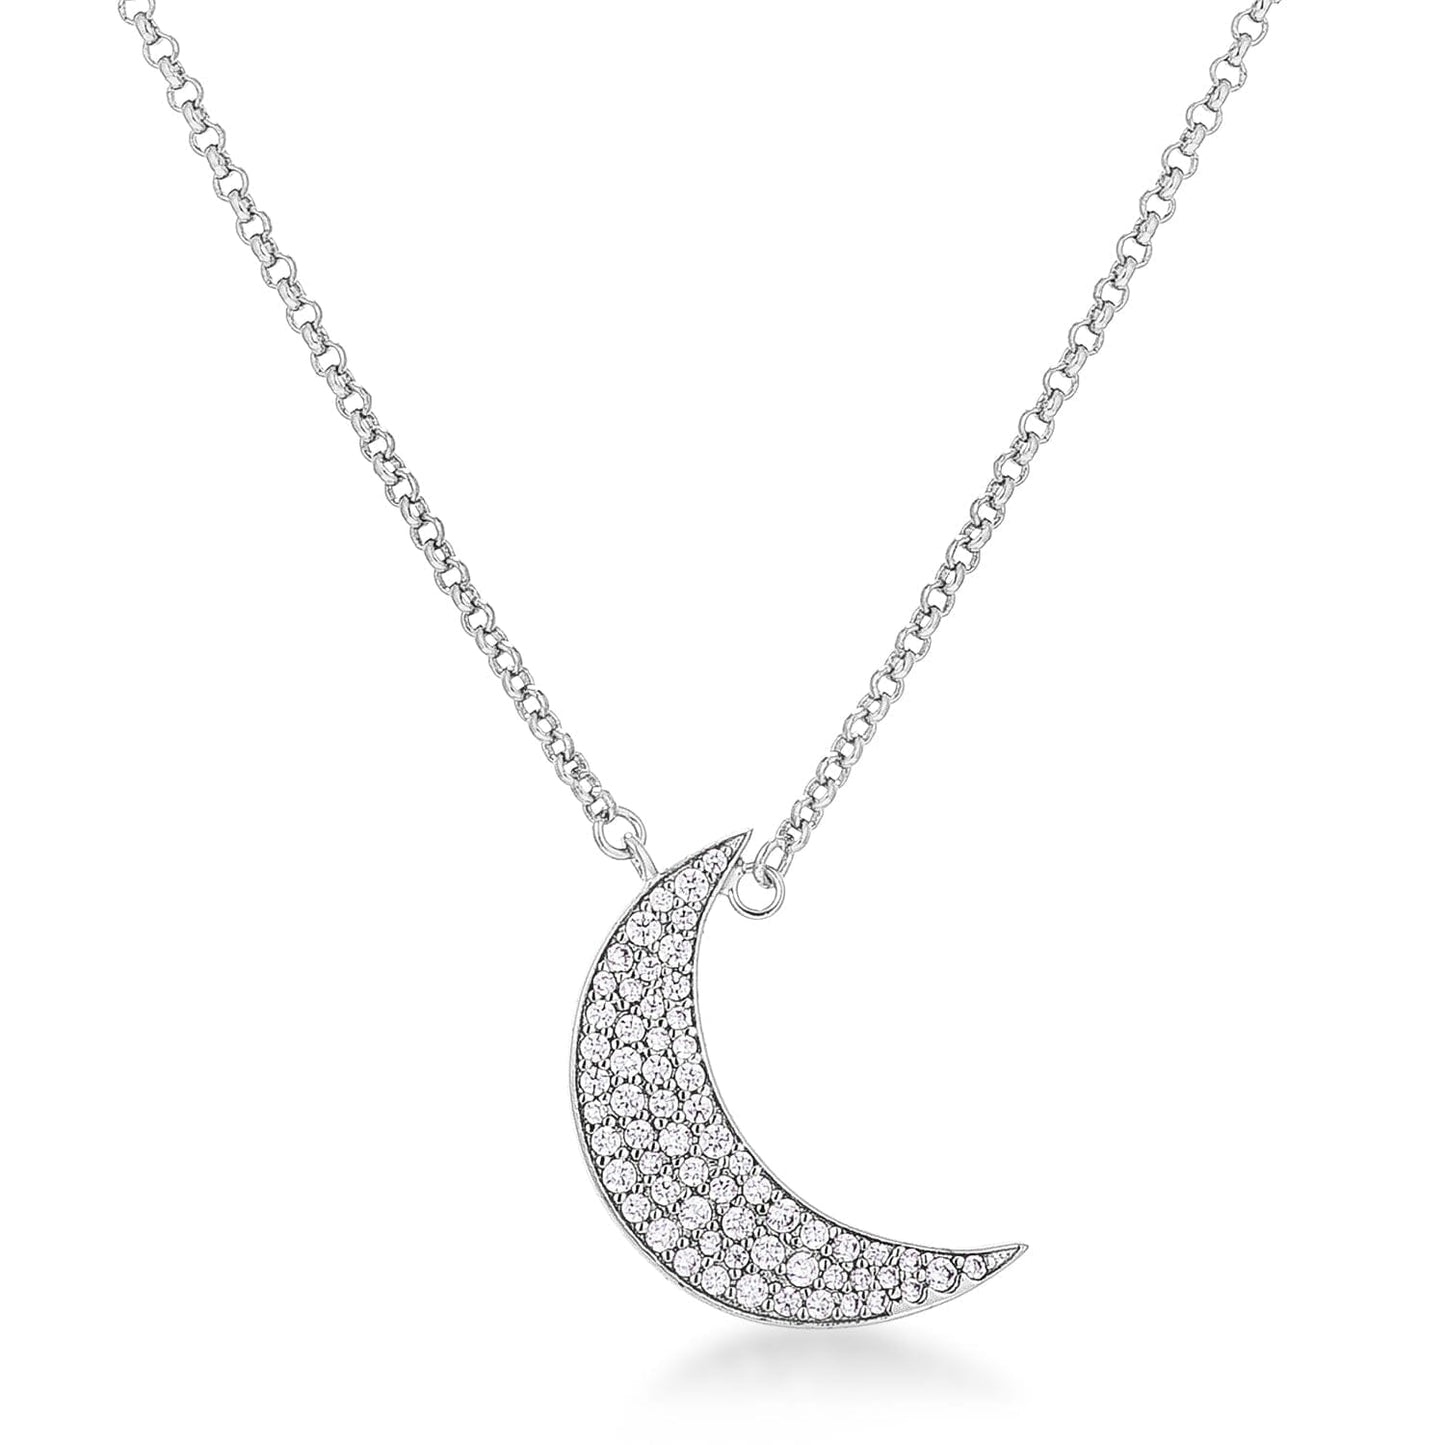 To the Moon and Back Cubic Zirconia Necklace Necklaces Das Juwel 